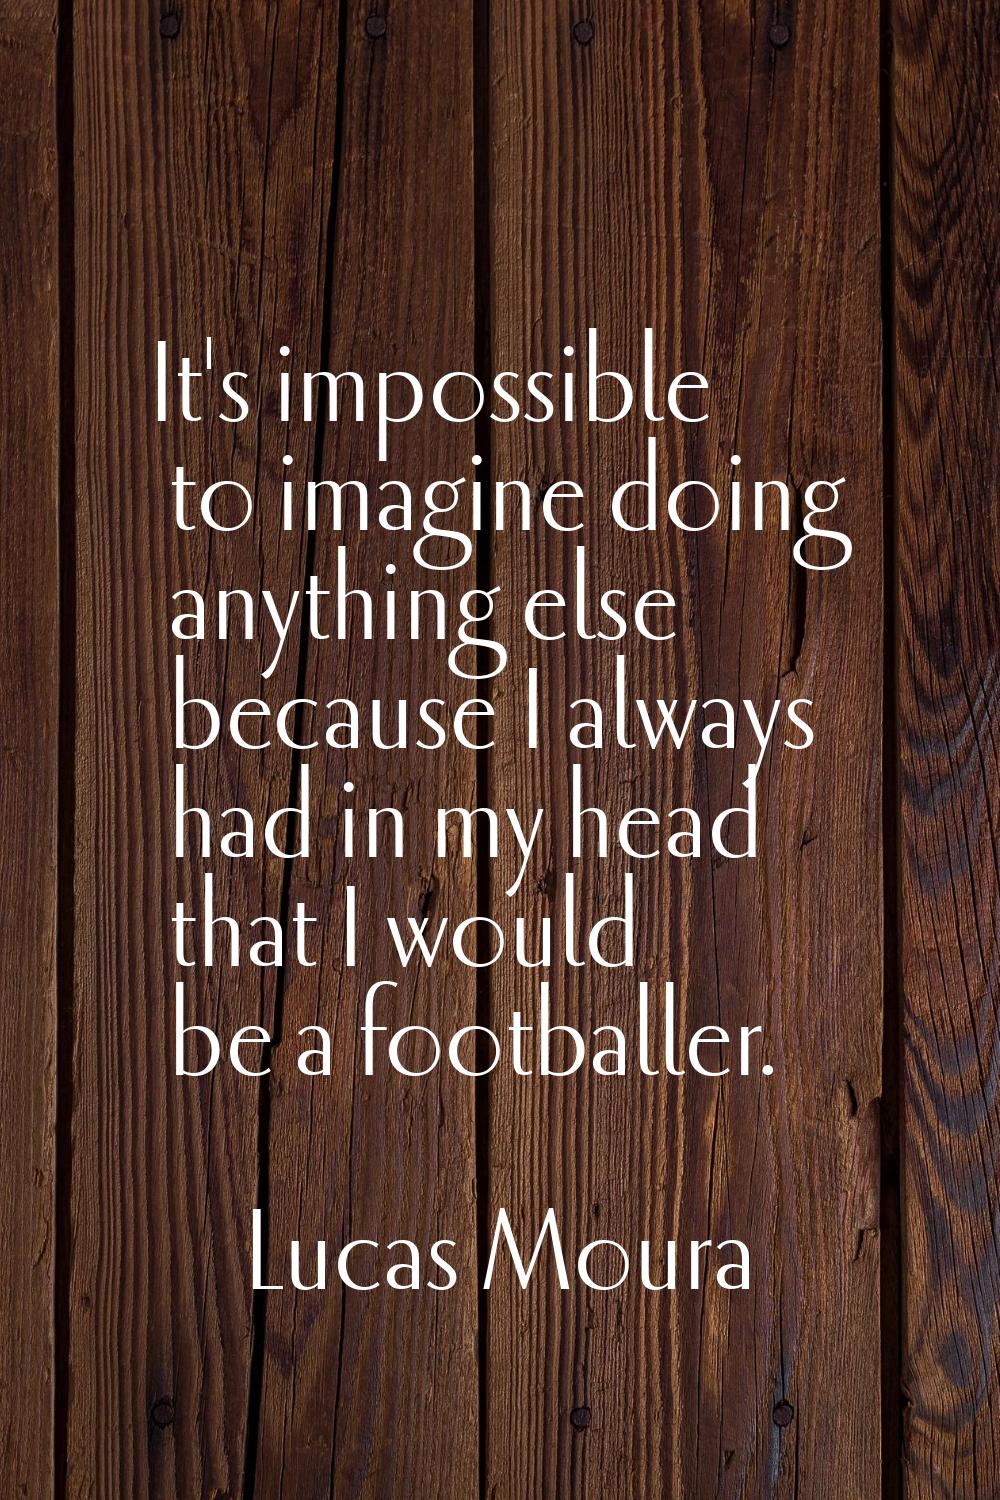 It's impossible to imagine doing anything else because I always had in my head that I would be a fo